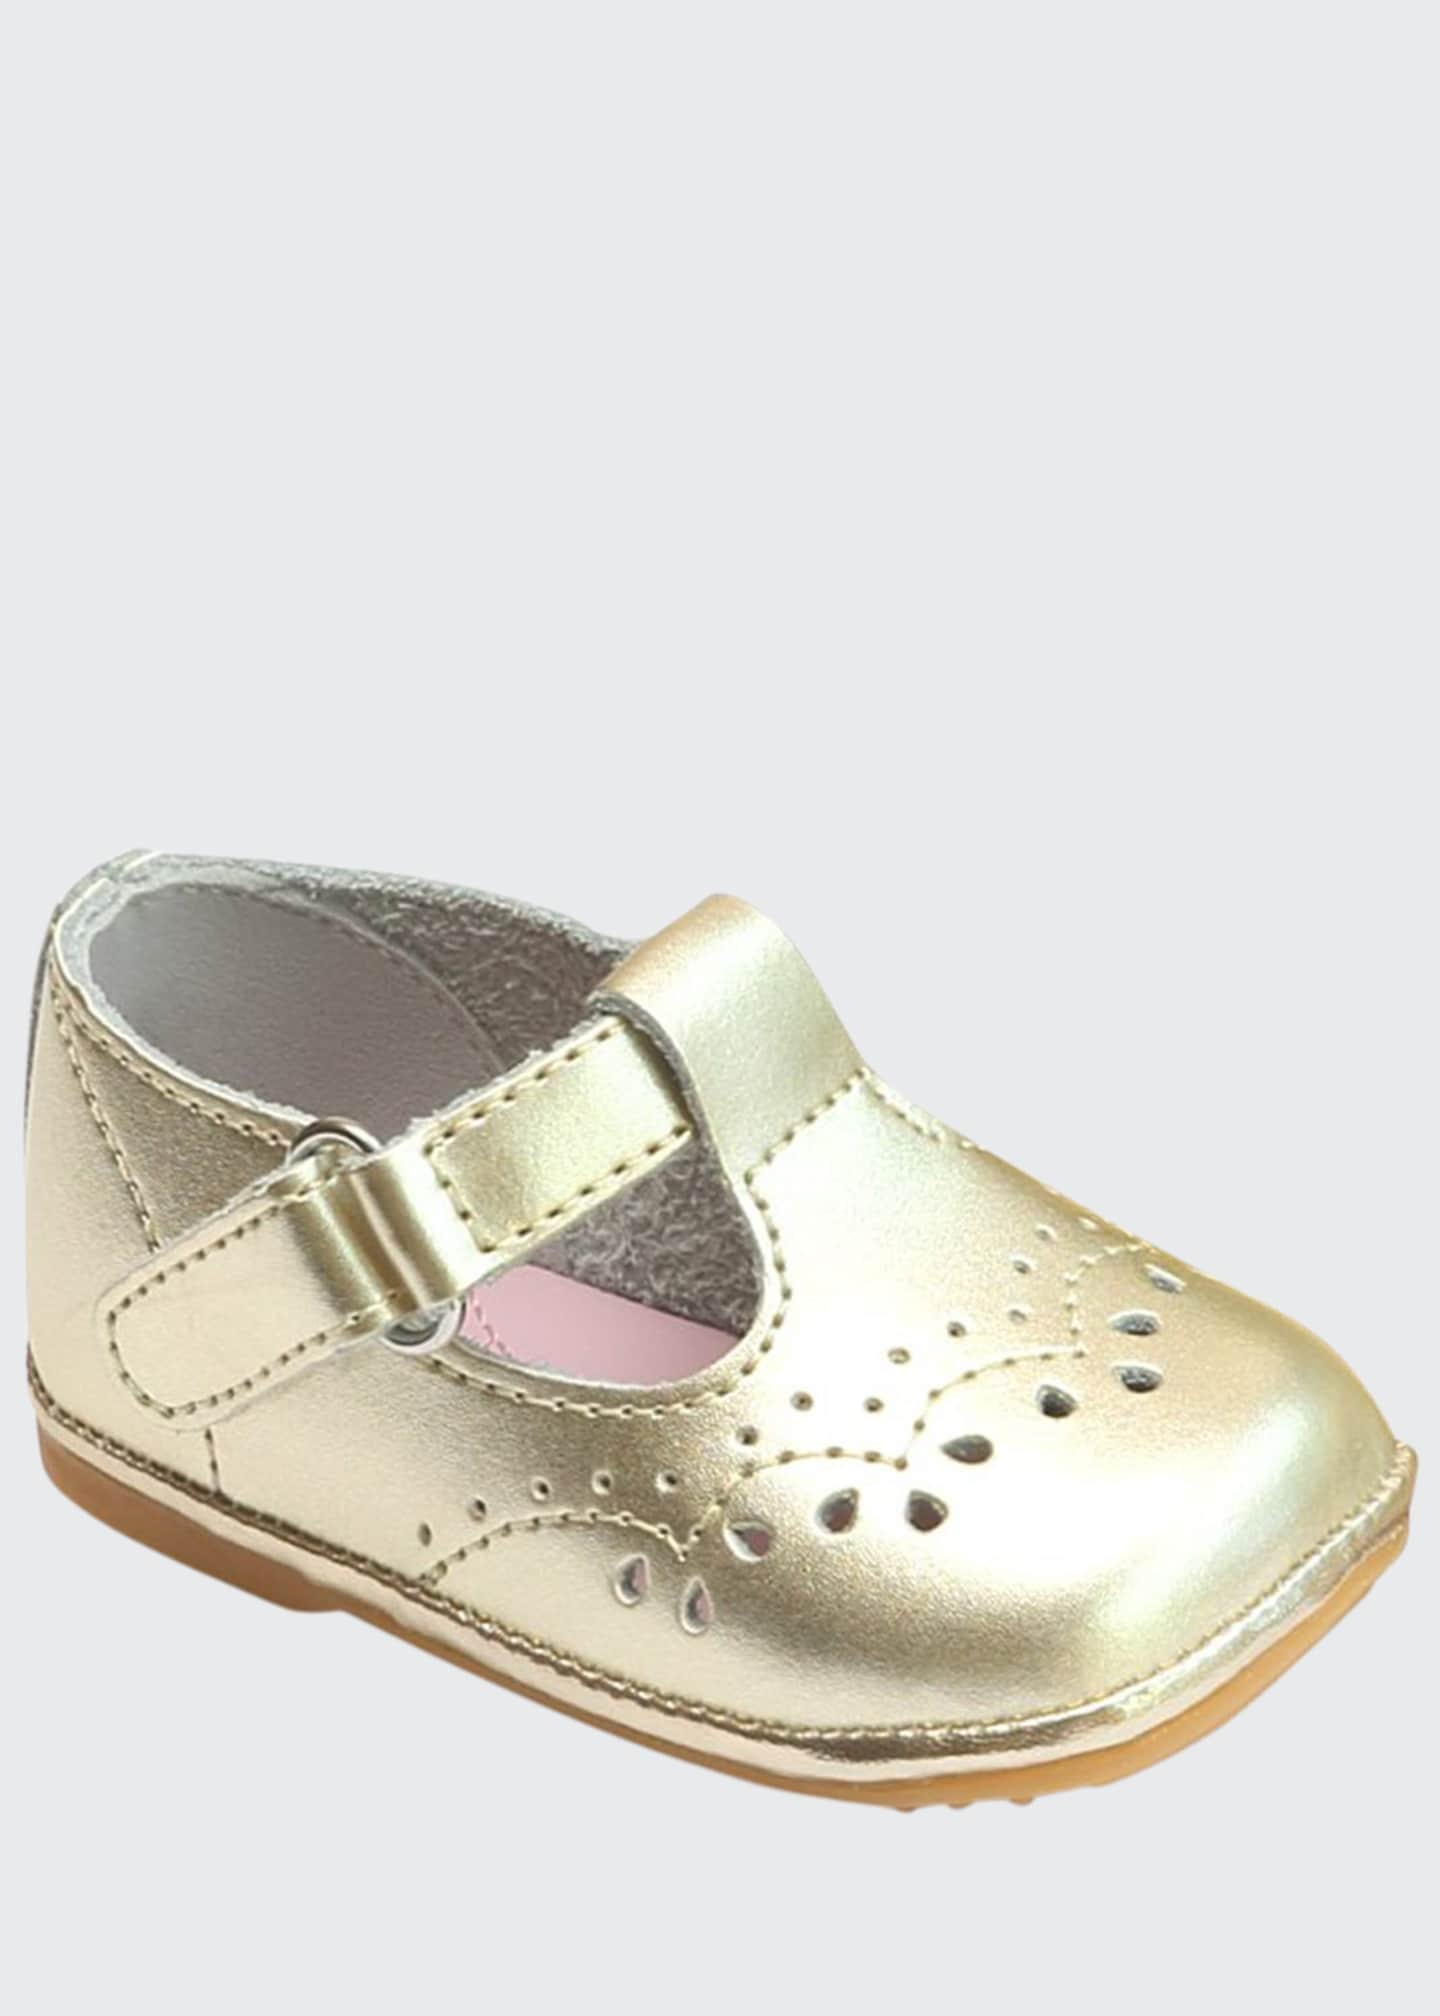 L'Amour Shoes Birdie Metallic Leather T-Strap Brogue Mary Jane, Baby ...